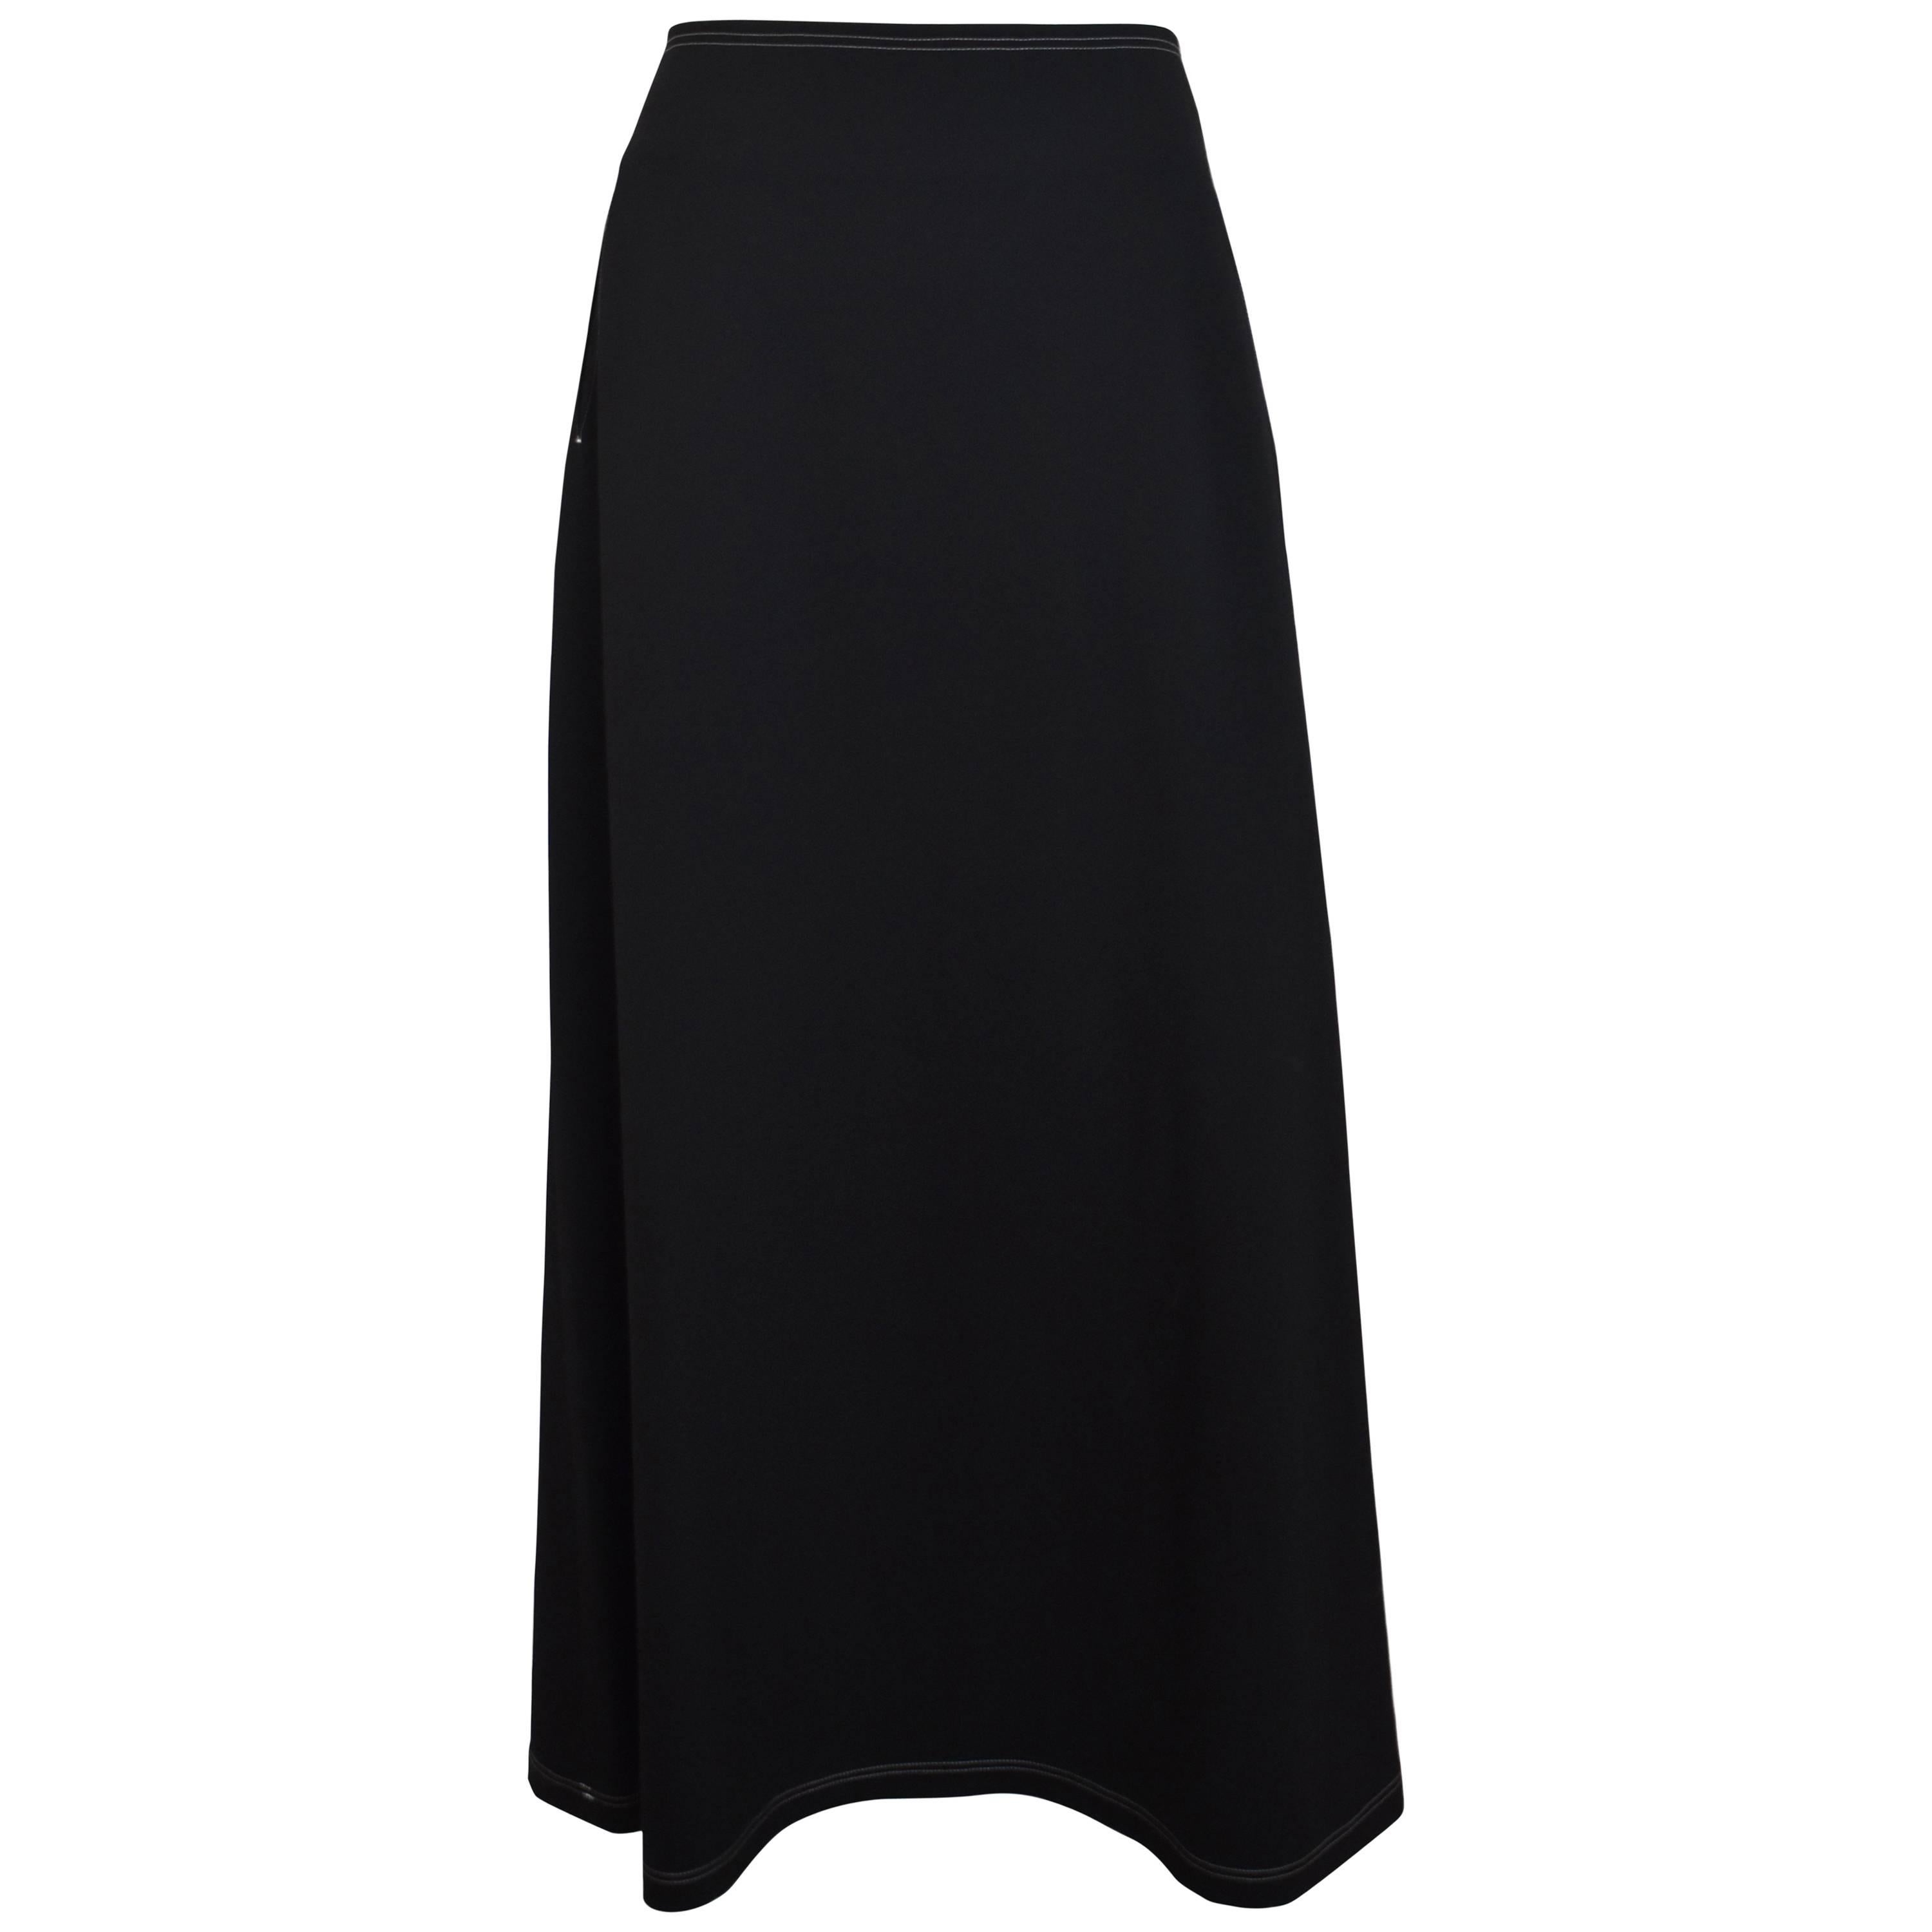 Y’s By Yohji Yamamoto Black A-Line Skirt with Contrast White Stitching and Pocke